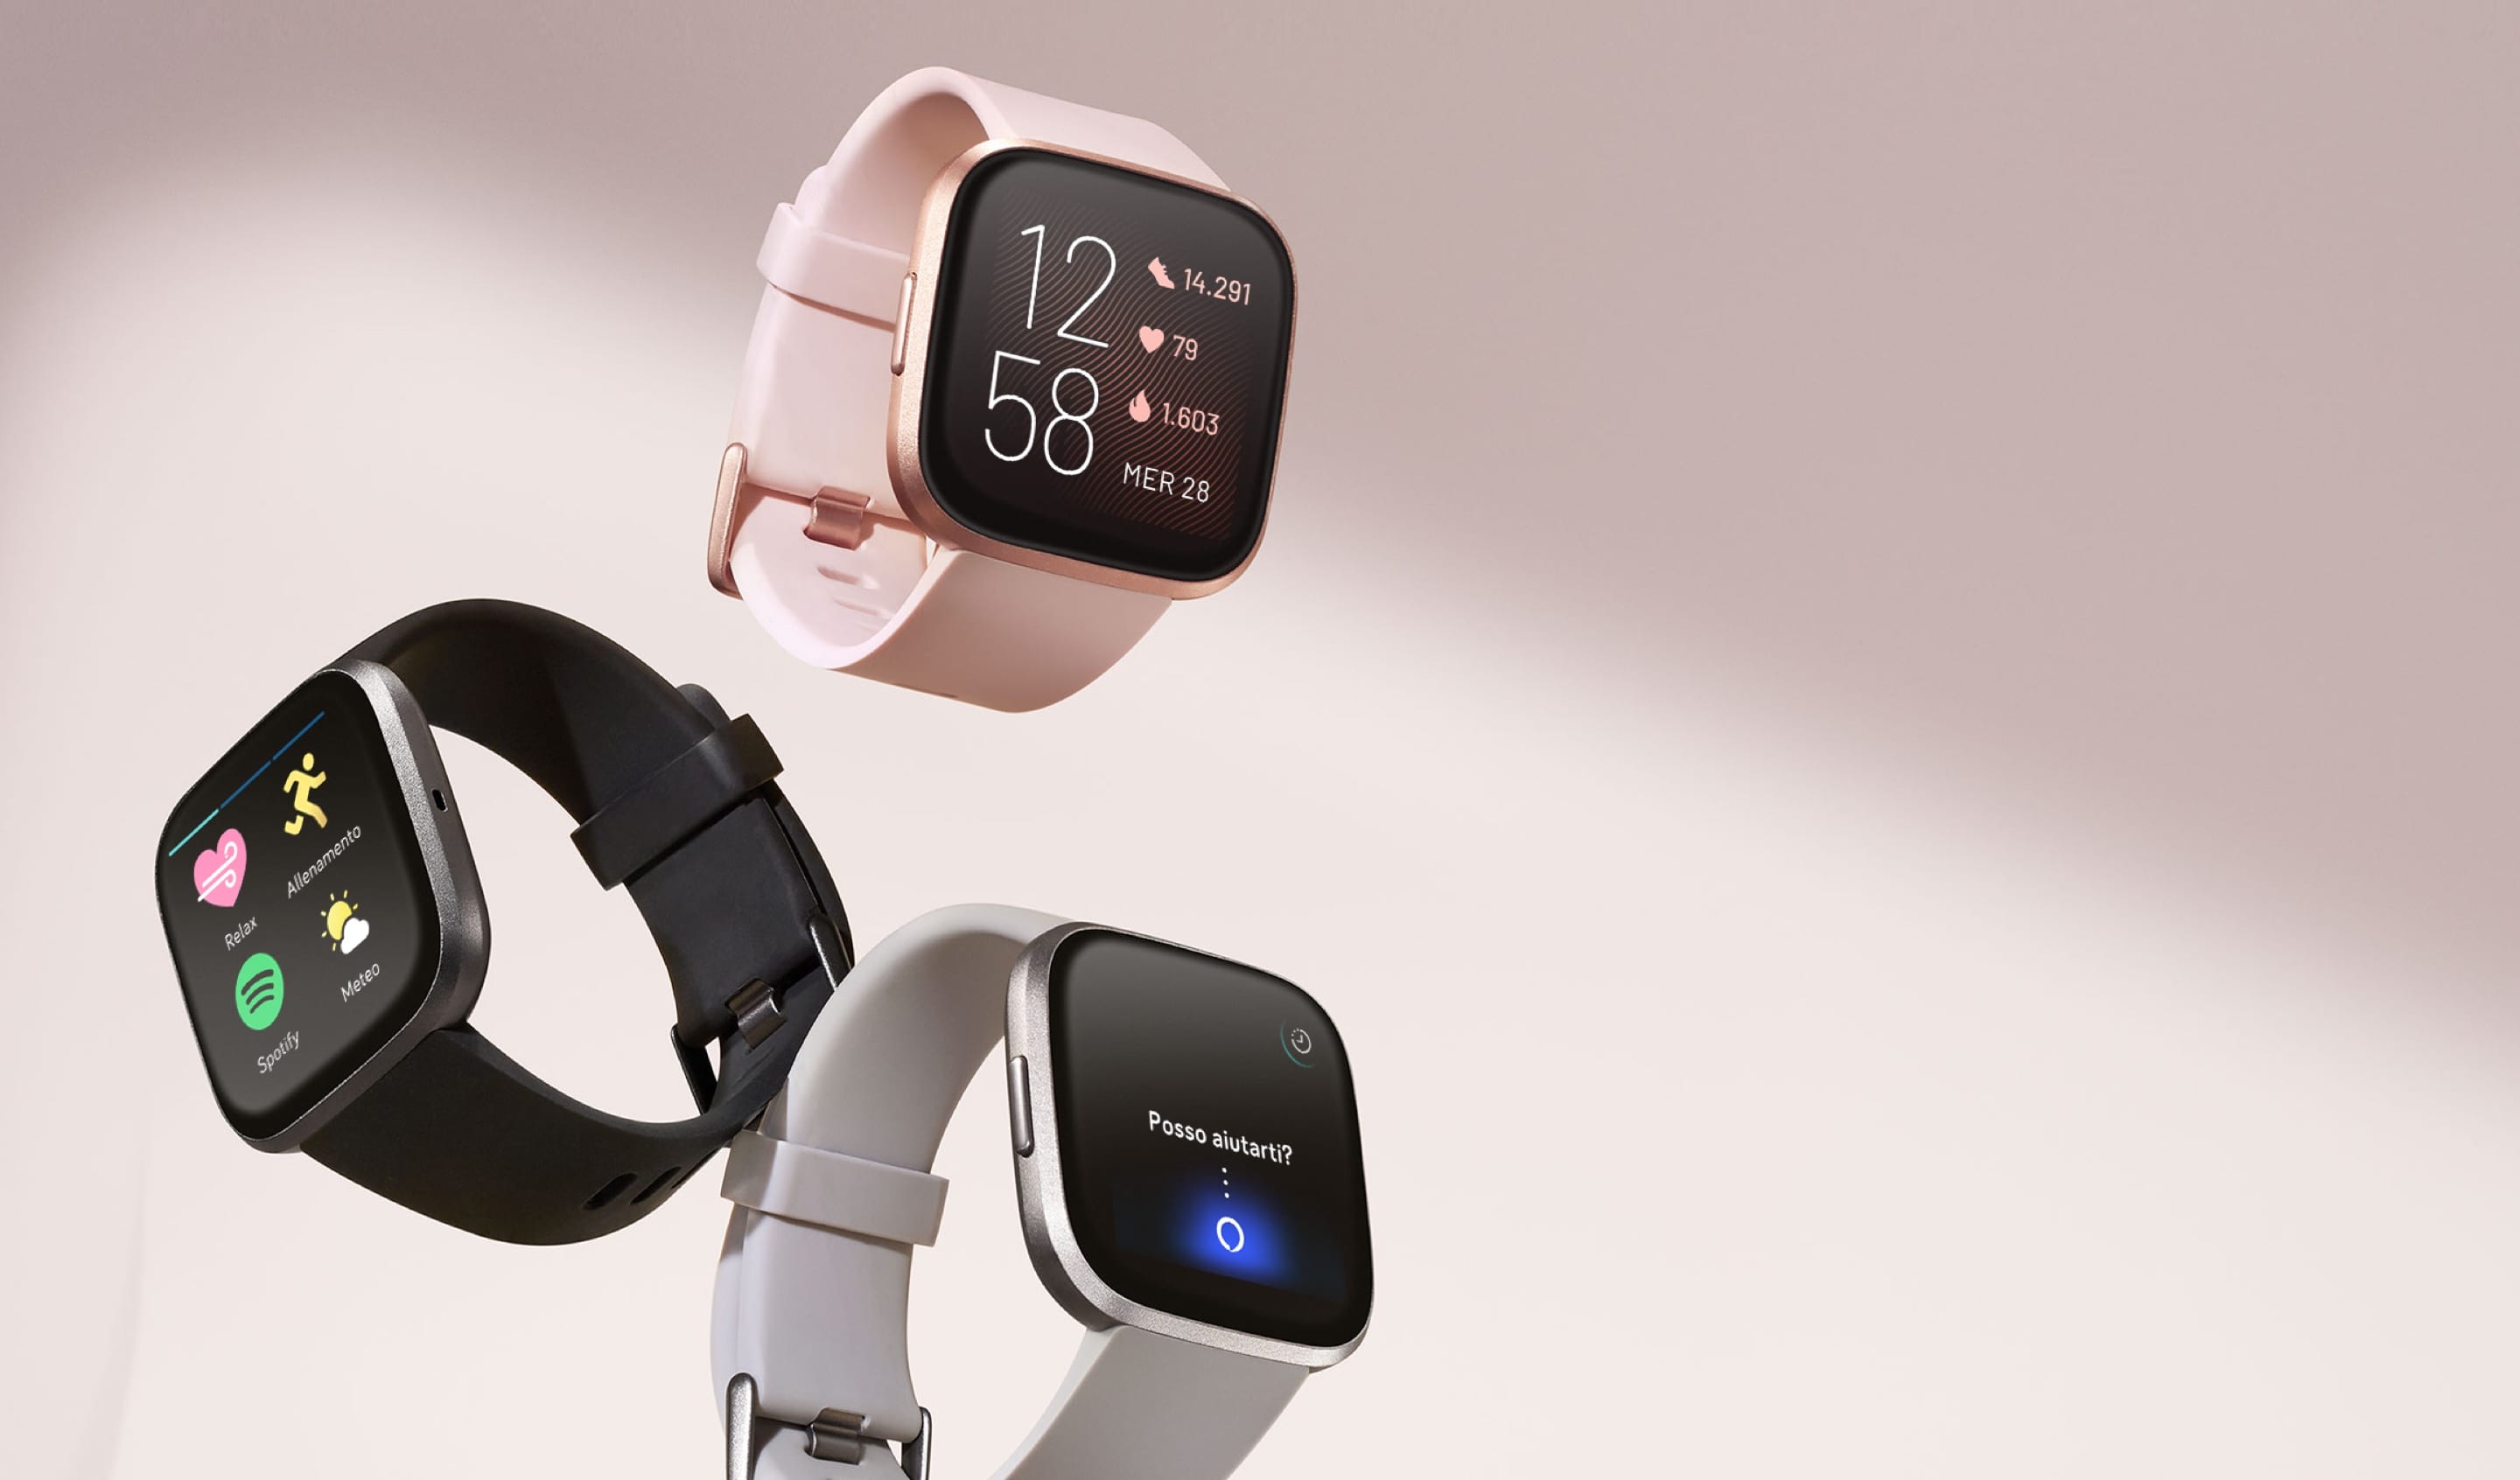 is the fitbit versa 2